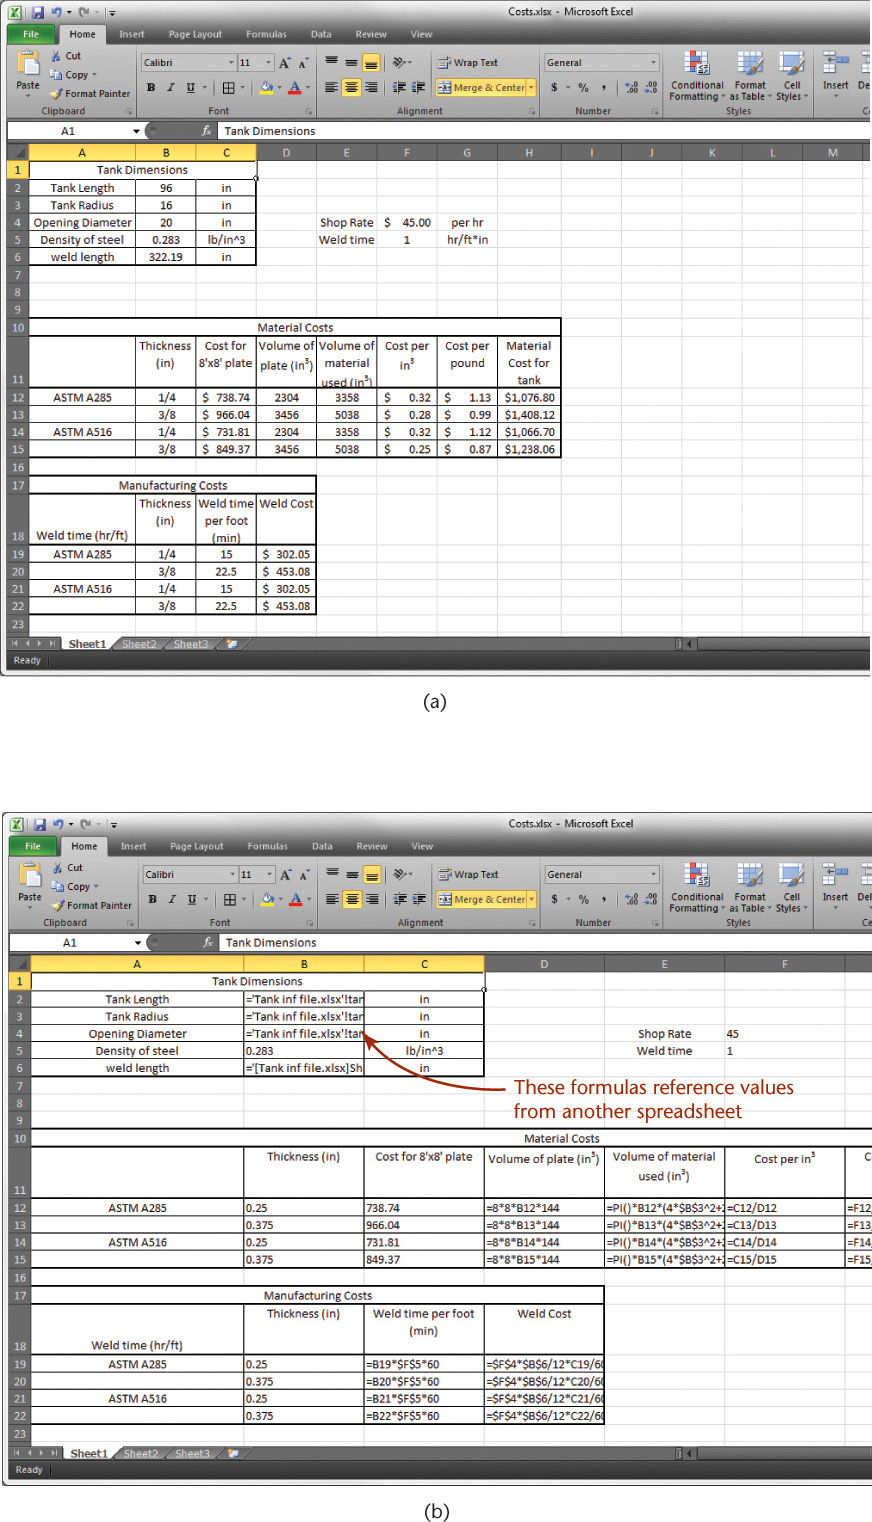 Two spreadsheets are shown, where the first sheet represents cost information calculated from tank parameters. The second sheet depicts the formula used for the calculations.